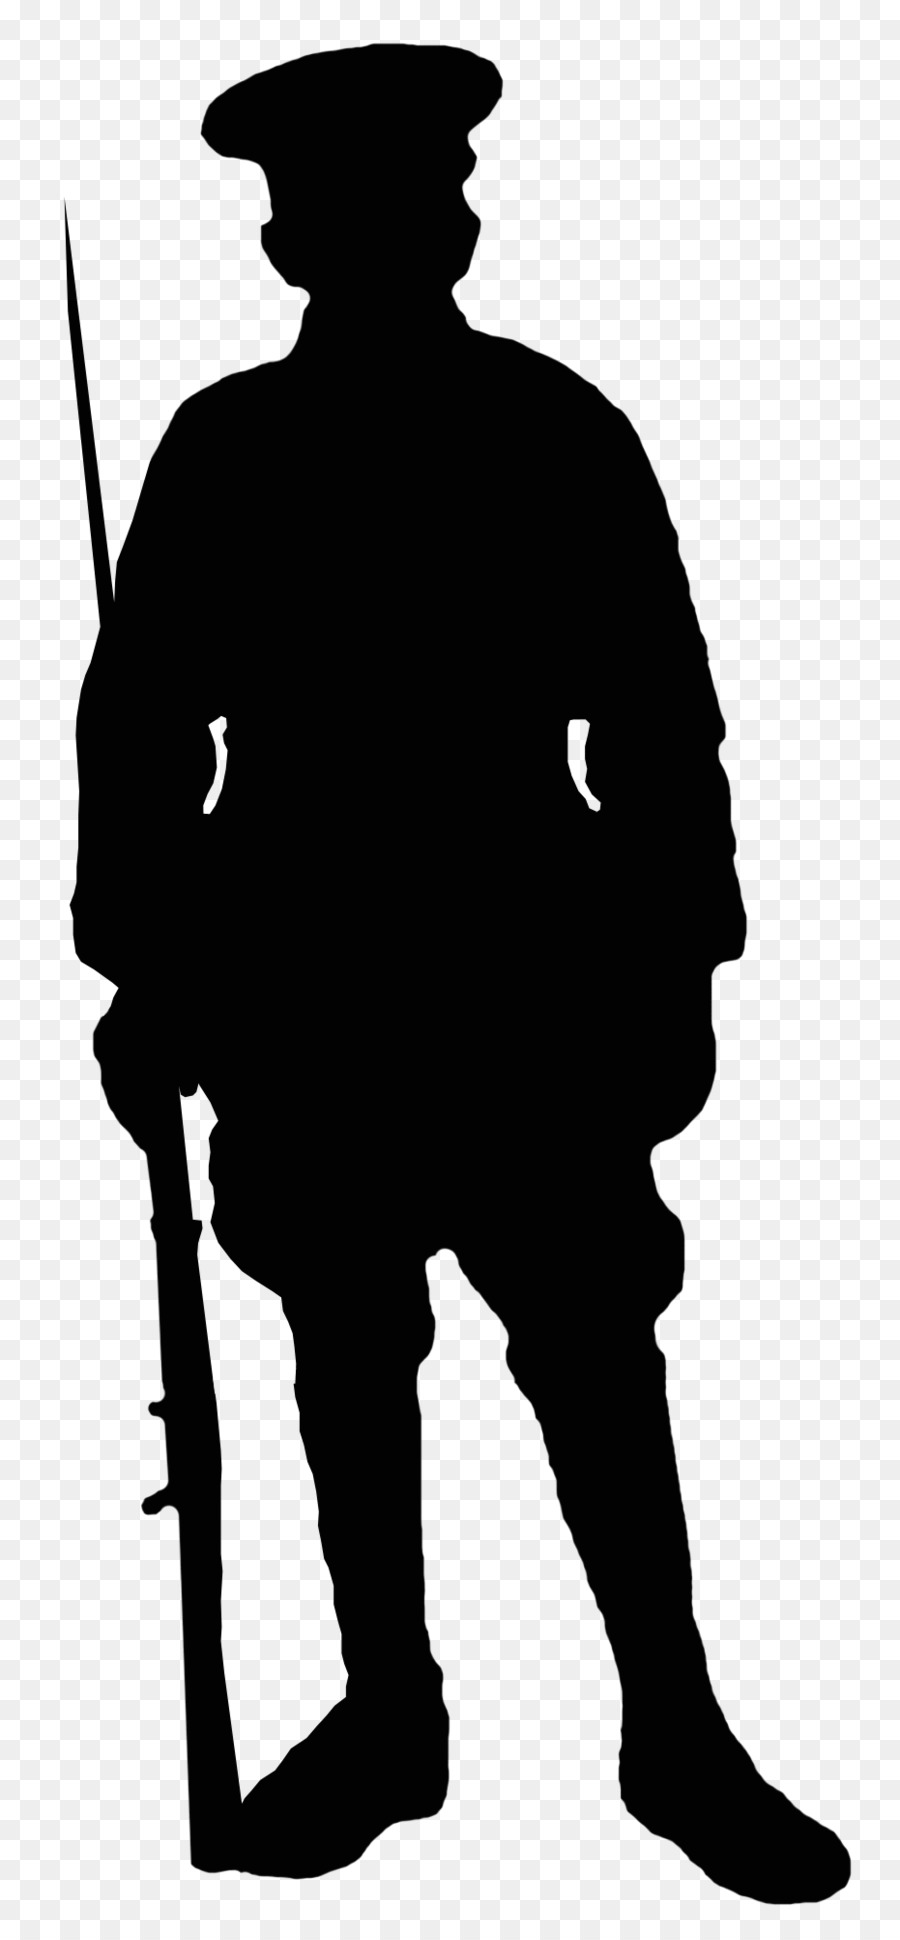 First World War Silhouette Soldier Military - Silhouette png download - 931*2000 - Free Transparent First World War png Download.